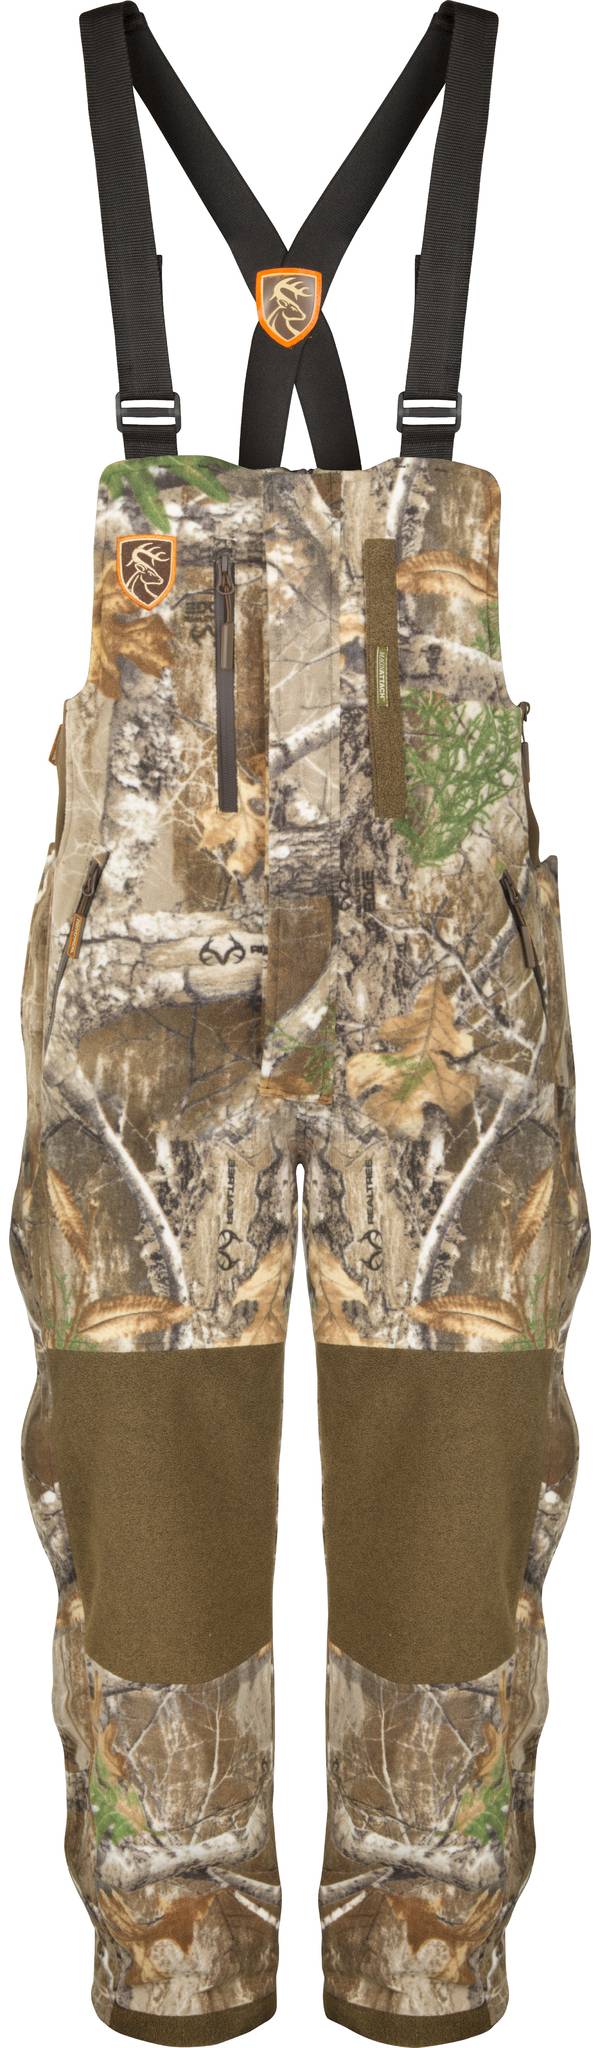 Drake Waterfowl Men's Non-Typical HydroHush Heavyweight Bibs with Agion Active XL product image